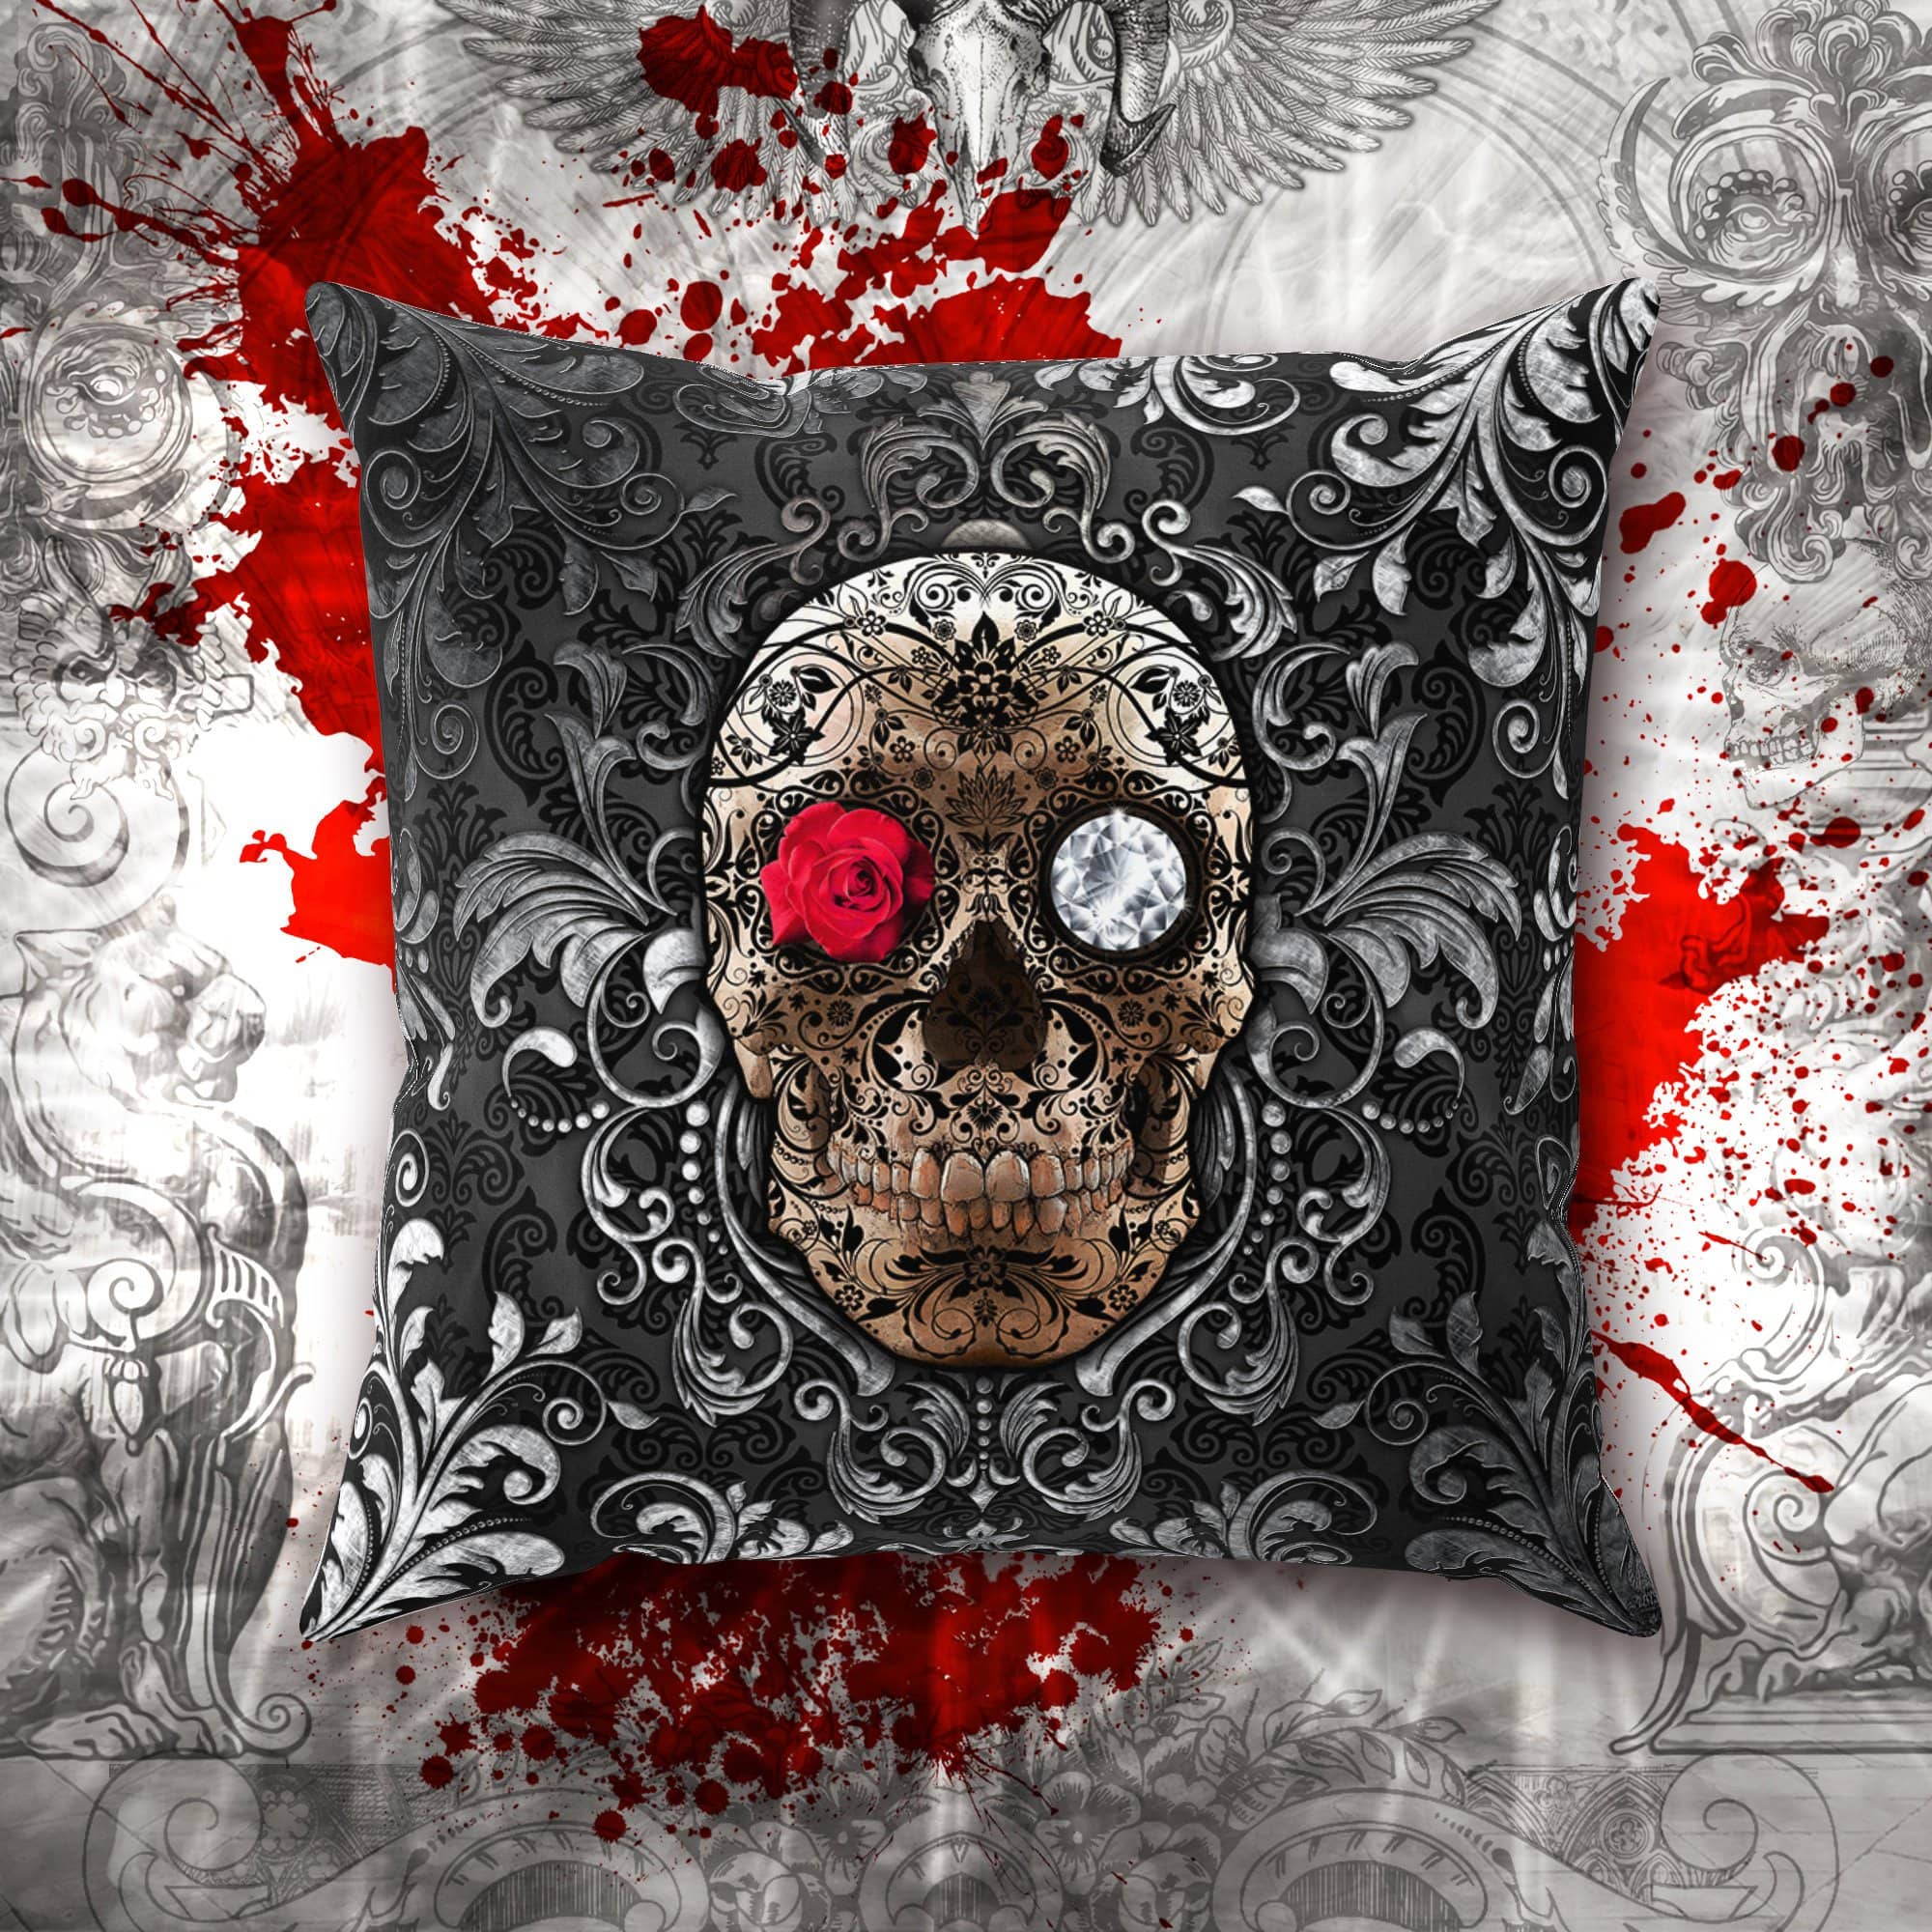 Sugar Skull Throw Pillow, Decorative Accent Cushion, Gothic Room Decor, Day of the Dead Decor - Abysm Internal